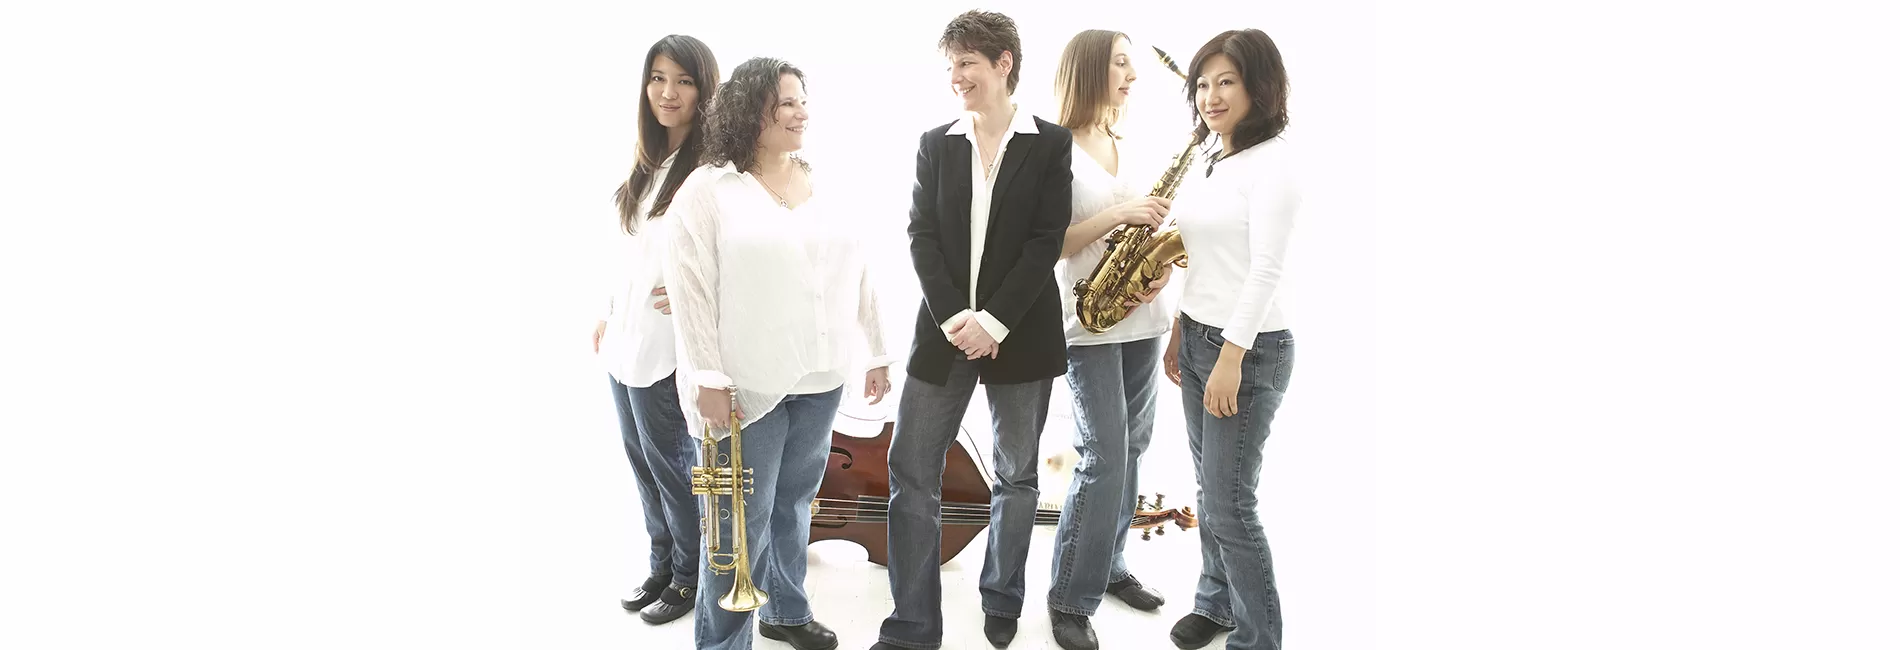 FIVE PLAY, the sister group of the world-renowned DIVA Jazz Orchestra